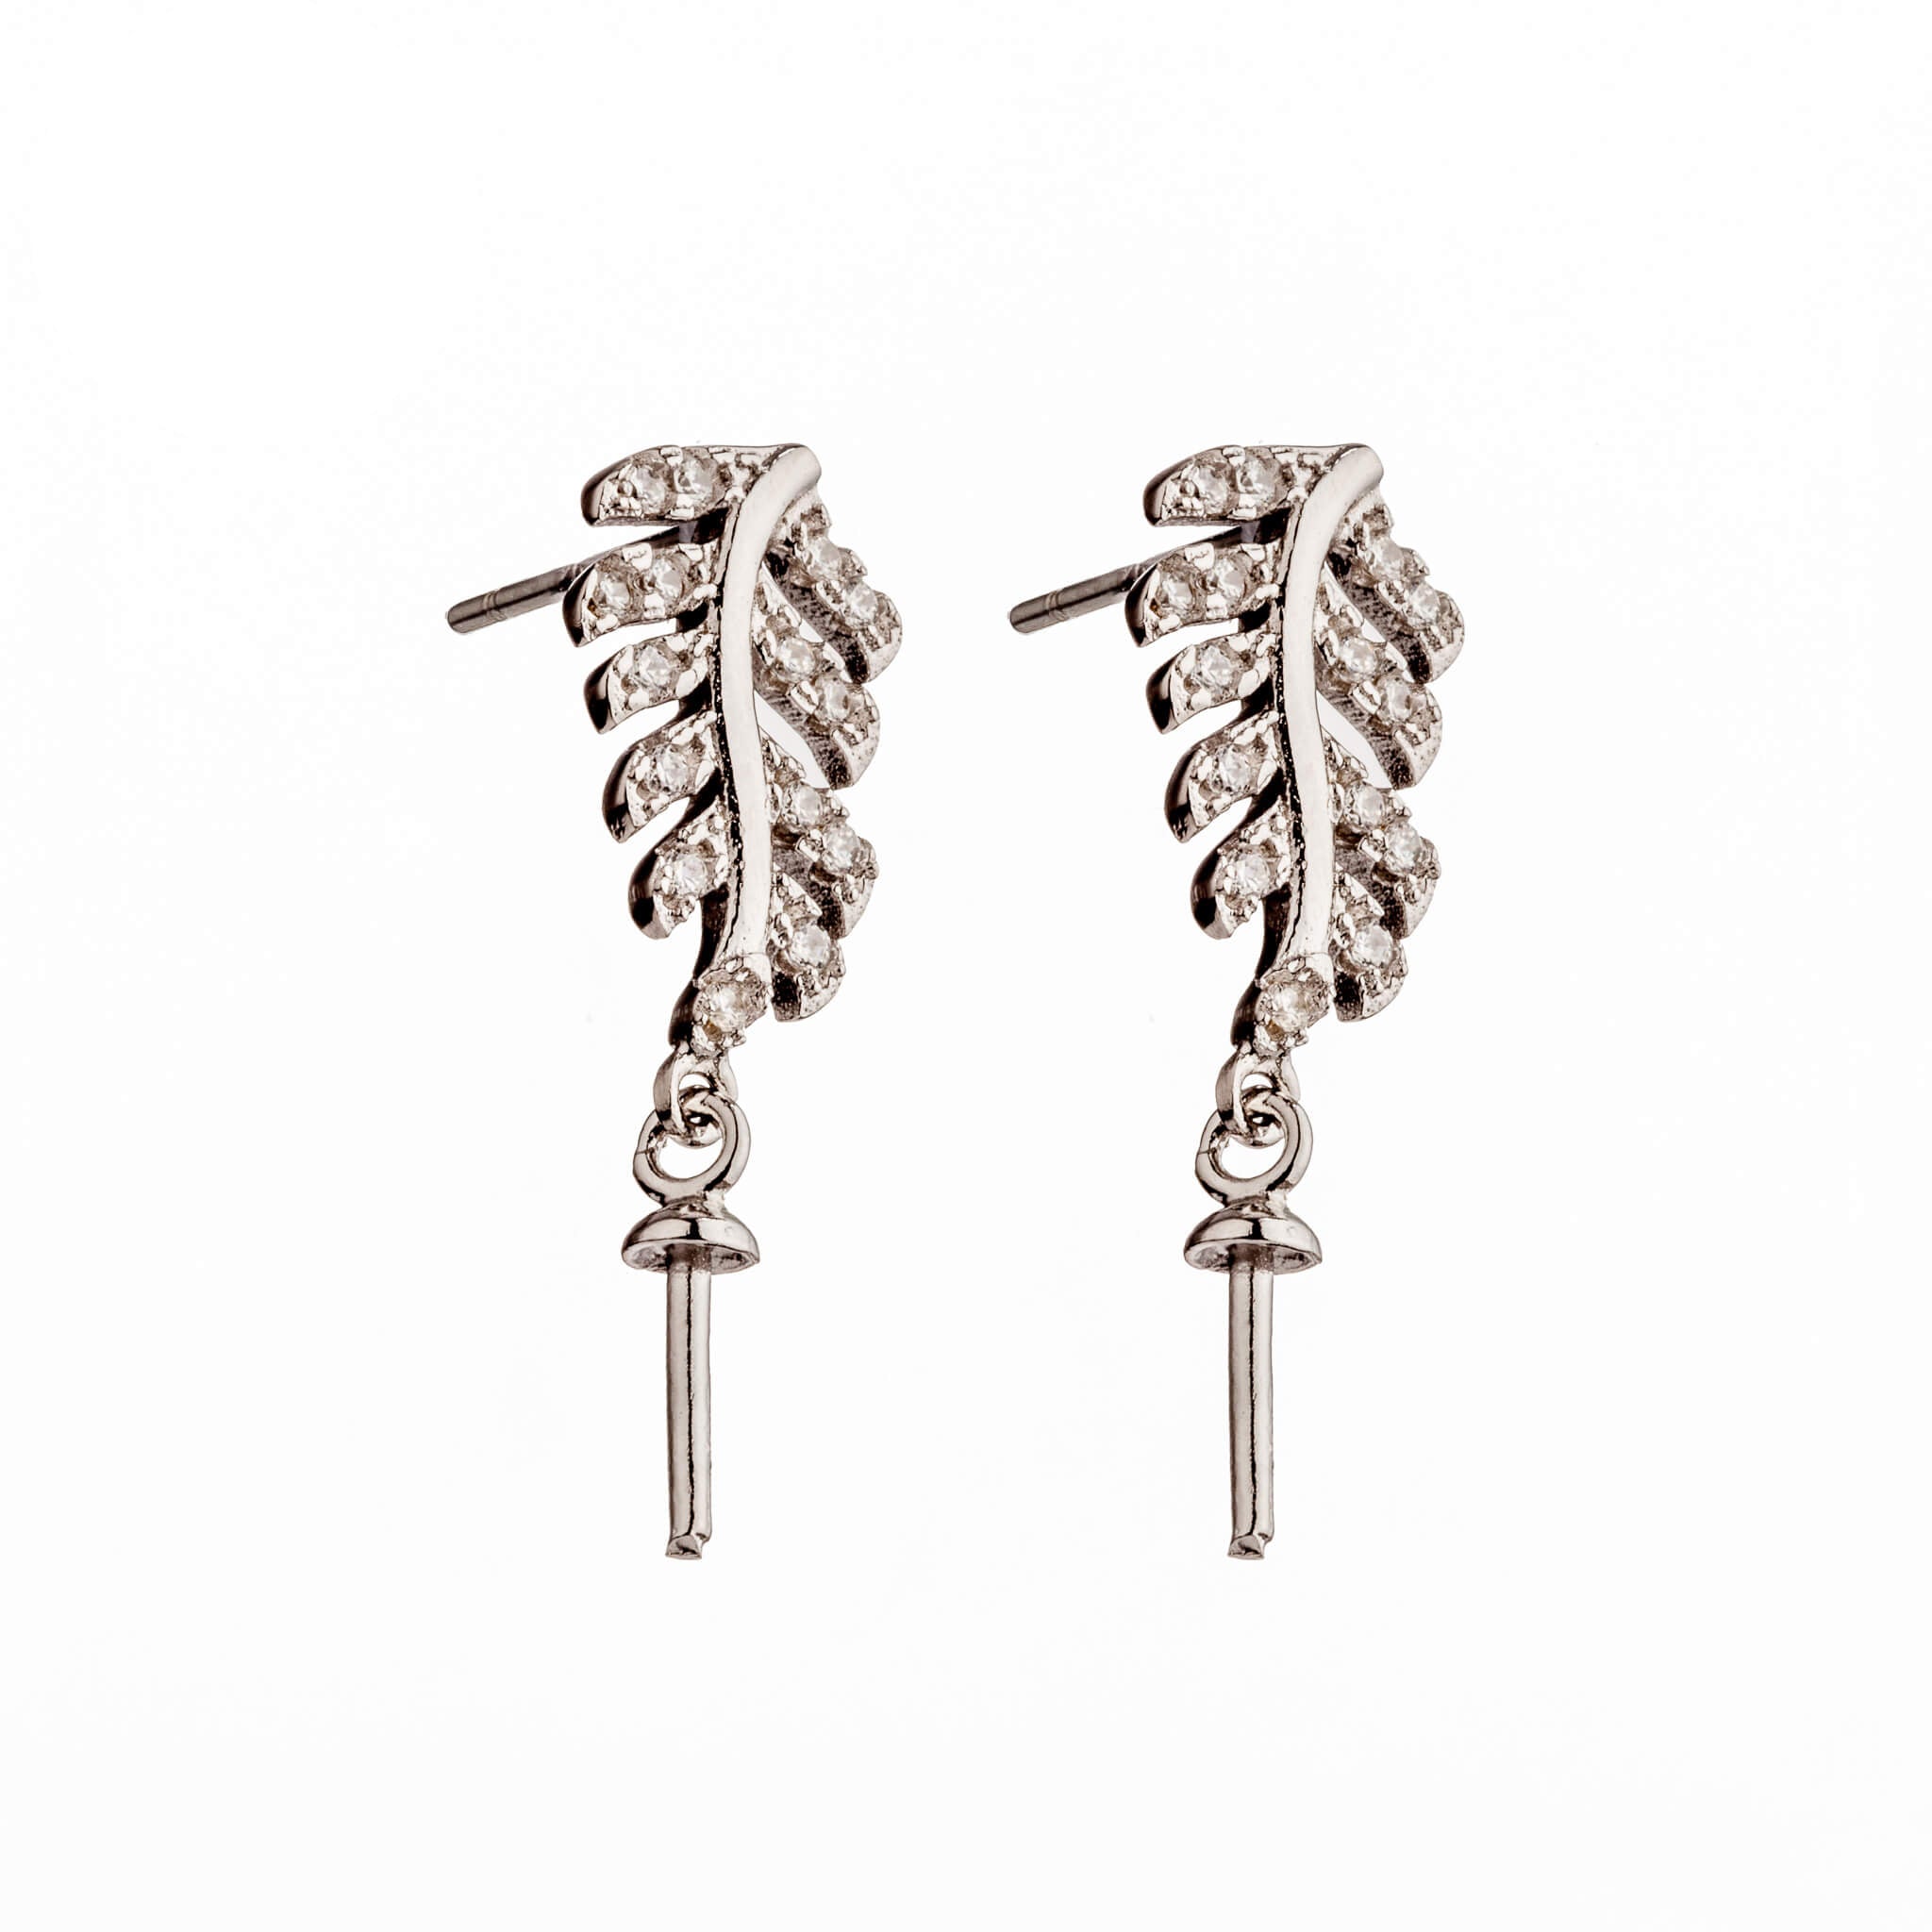 Ear Studs with Cubic Zirconia Inlays Leaf and Cup and Peg Mounting in Sterling Silver